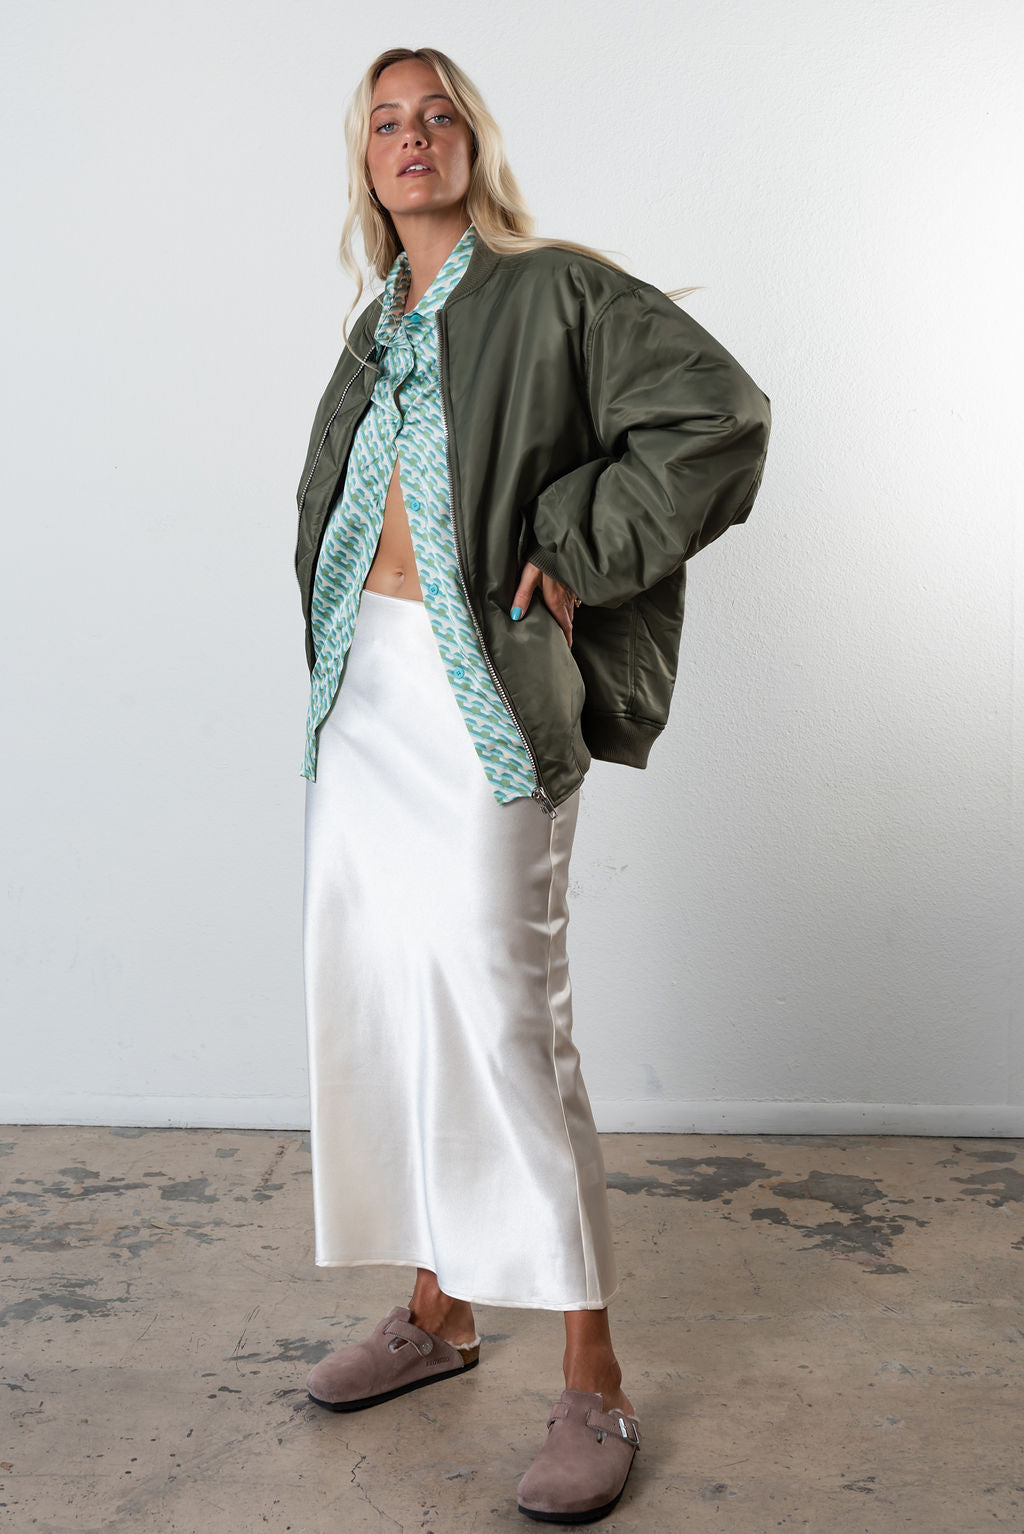 Between The Lines Satin Button Down Top In Aqua/Multi